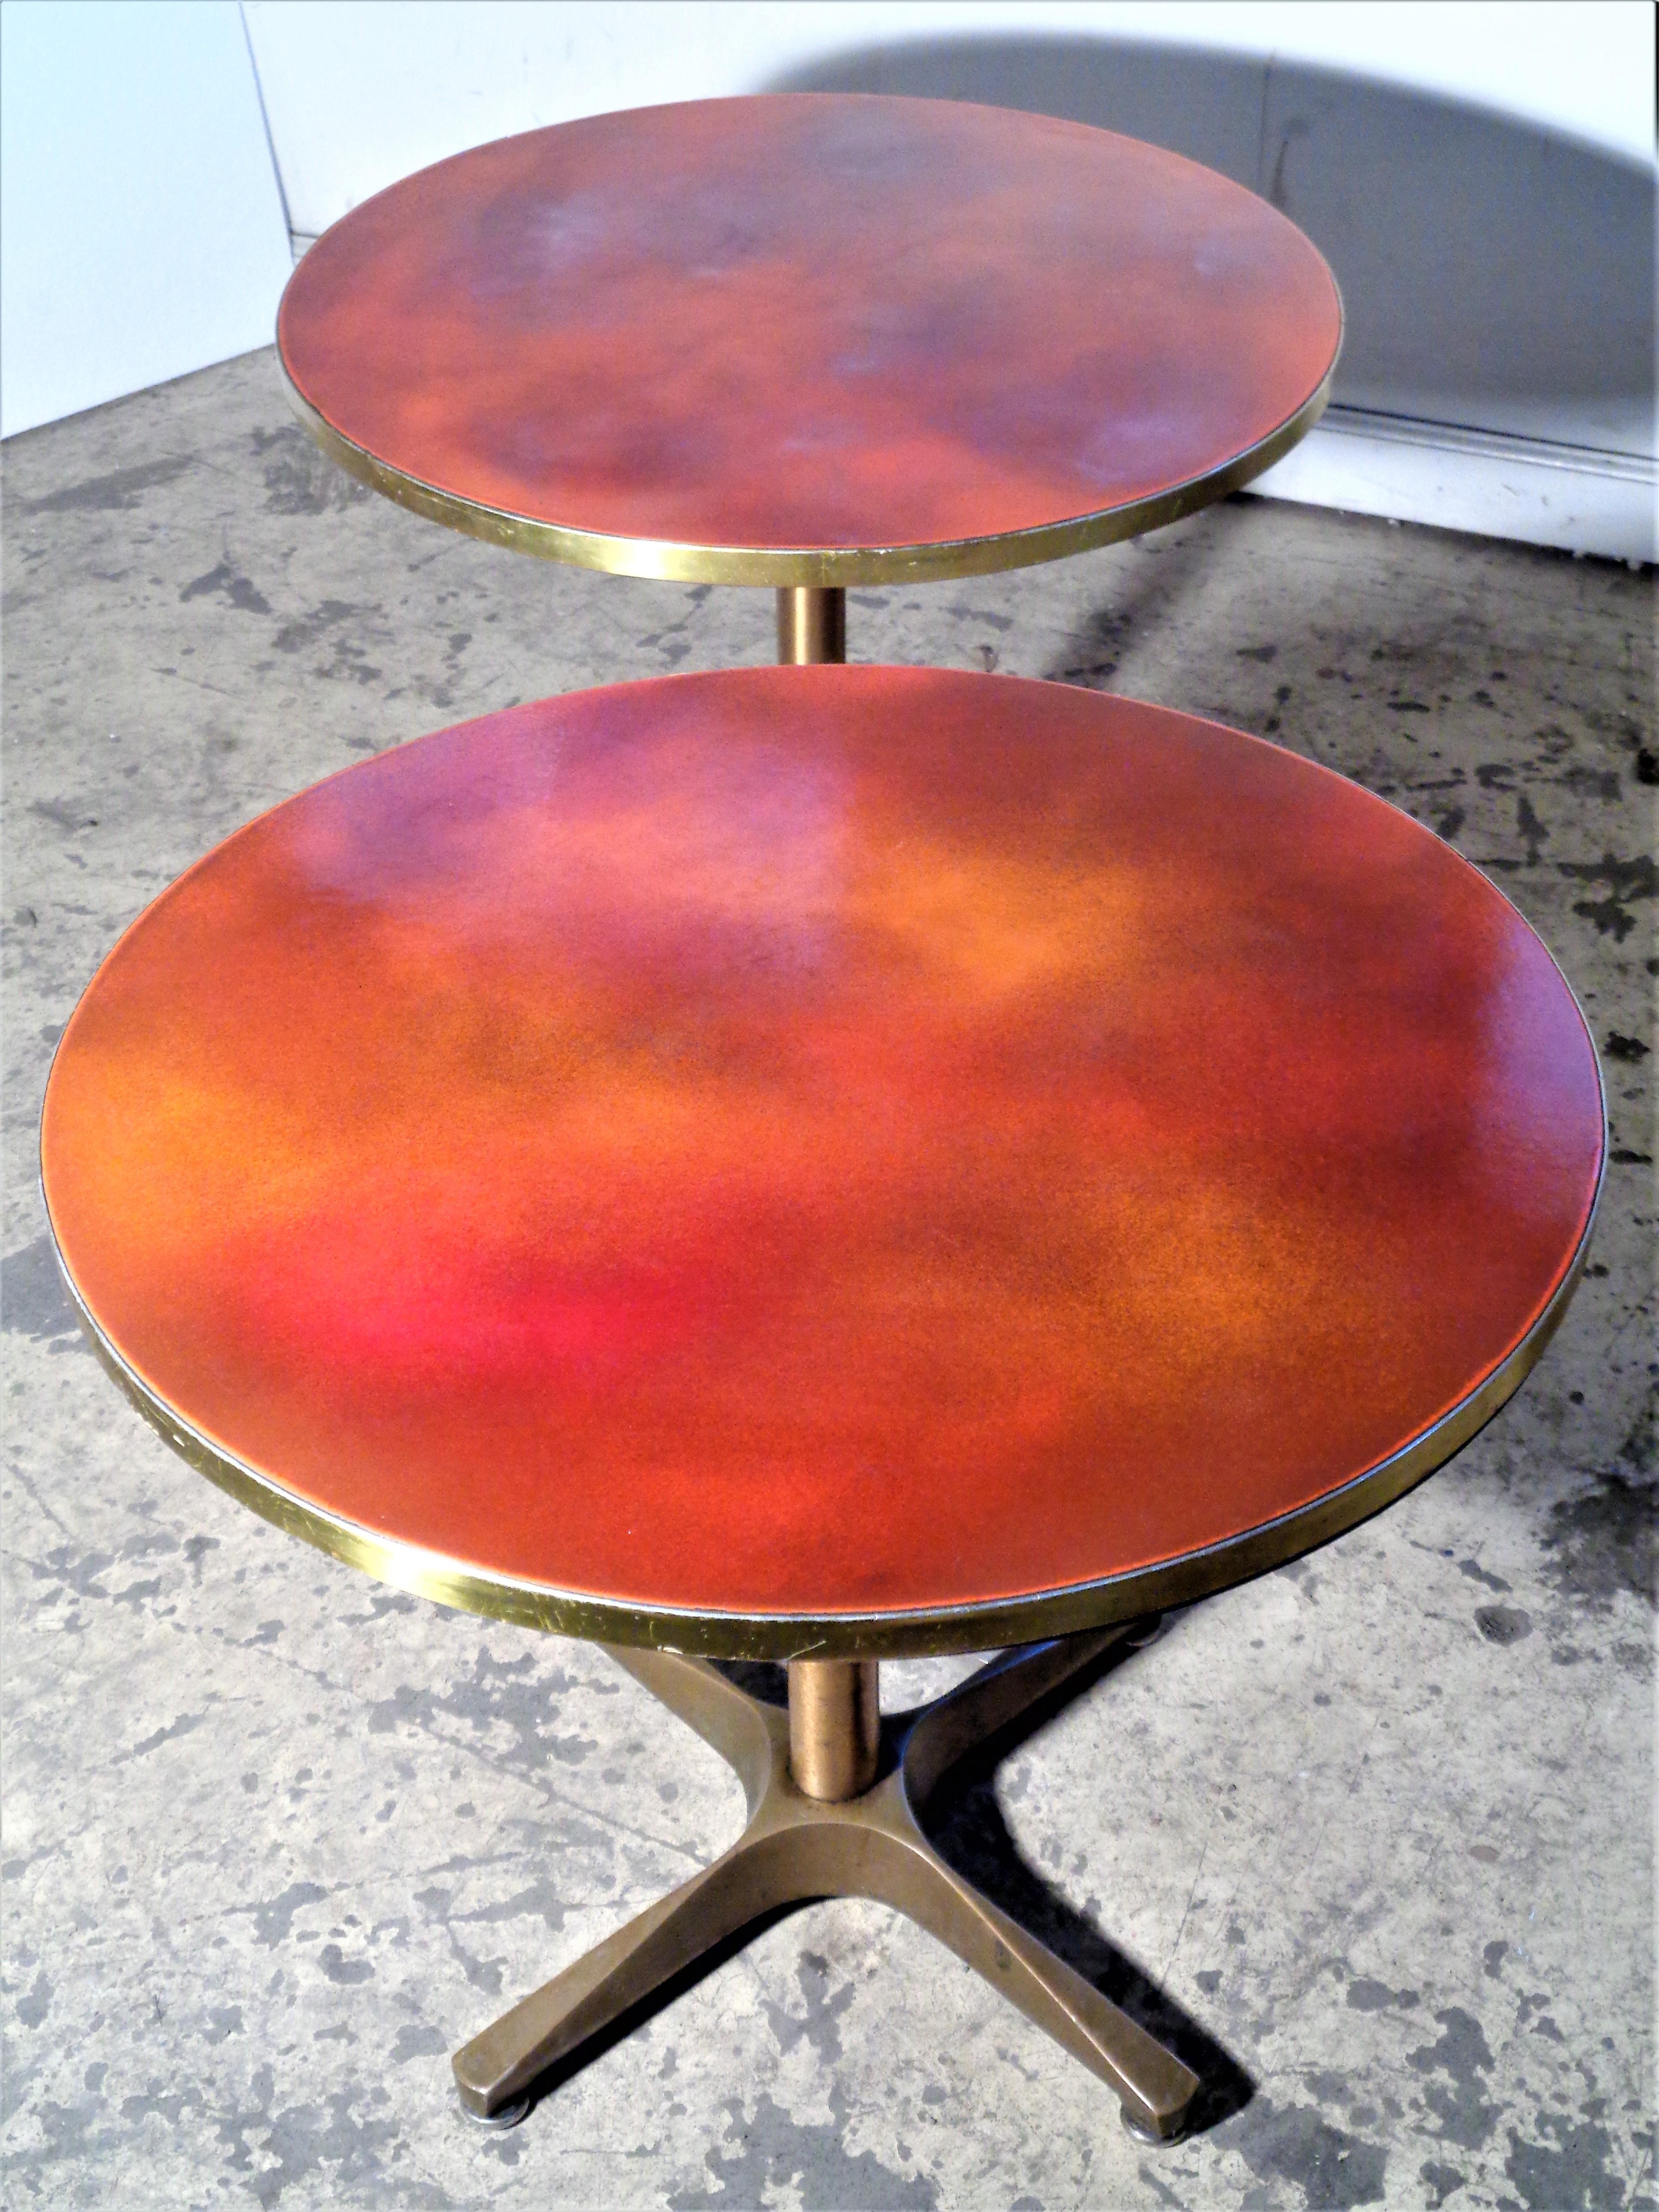 Industrial quality bronze and iron x base adjustable height pedestal tables with brass trimmed brilliant variegated orange enameled tops. The circular tops lock into place lock by spinning tops to the right and they will swivel by spinning the tops